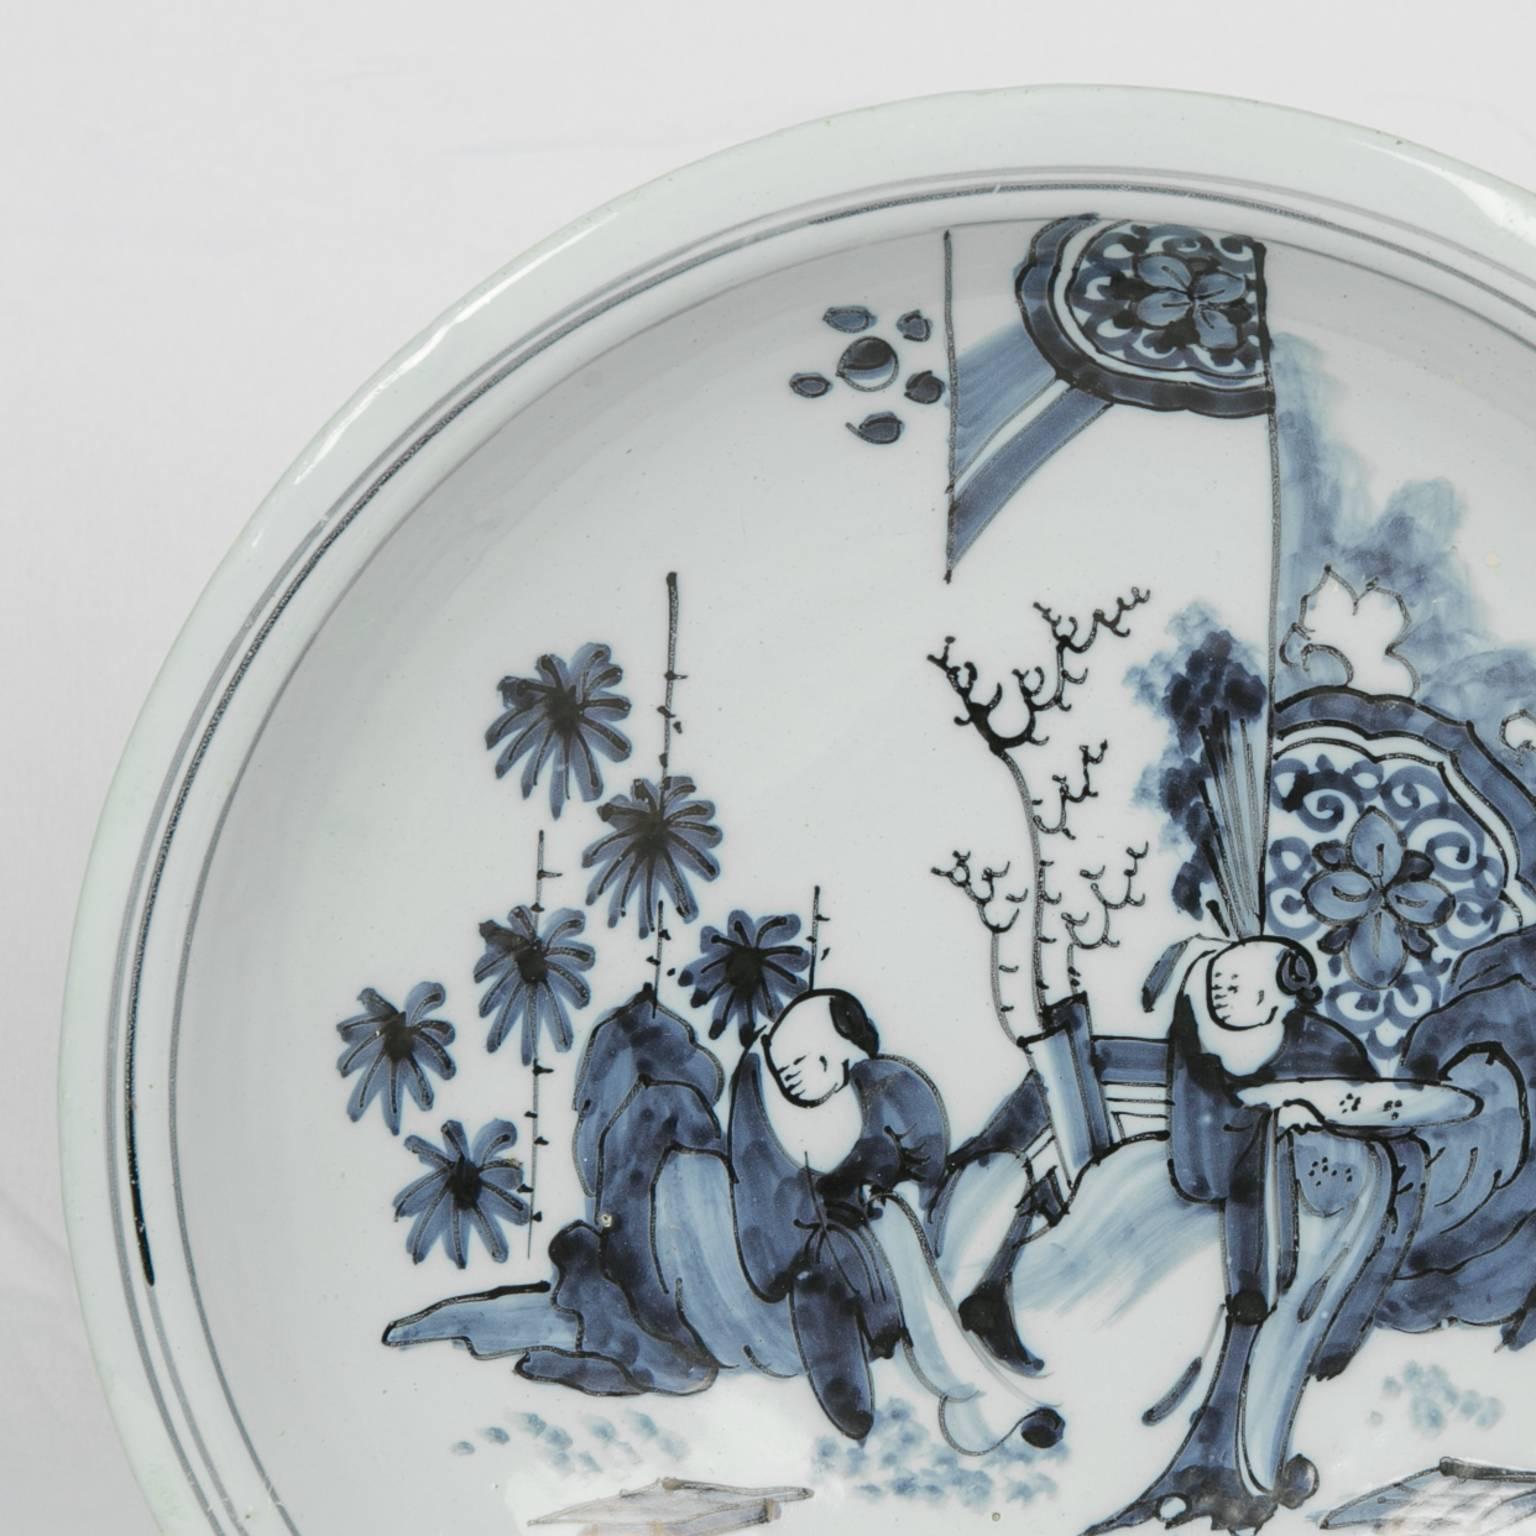 Chinoiserie Blue and White Delft Charger with Chinese Inspired Scene Made circa 1640-1650